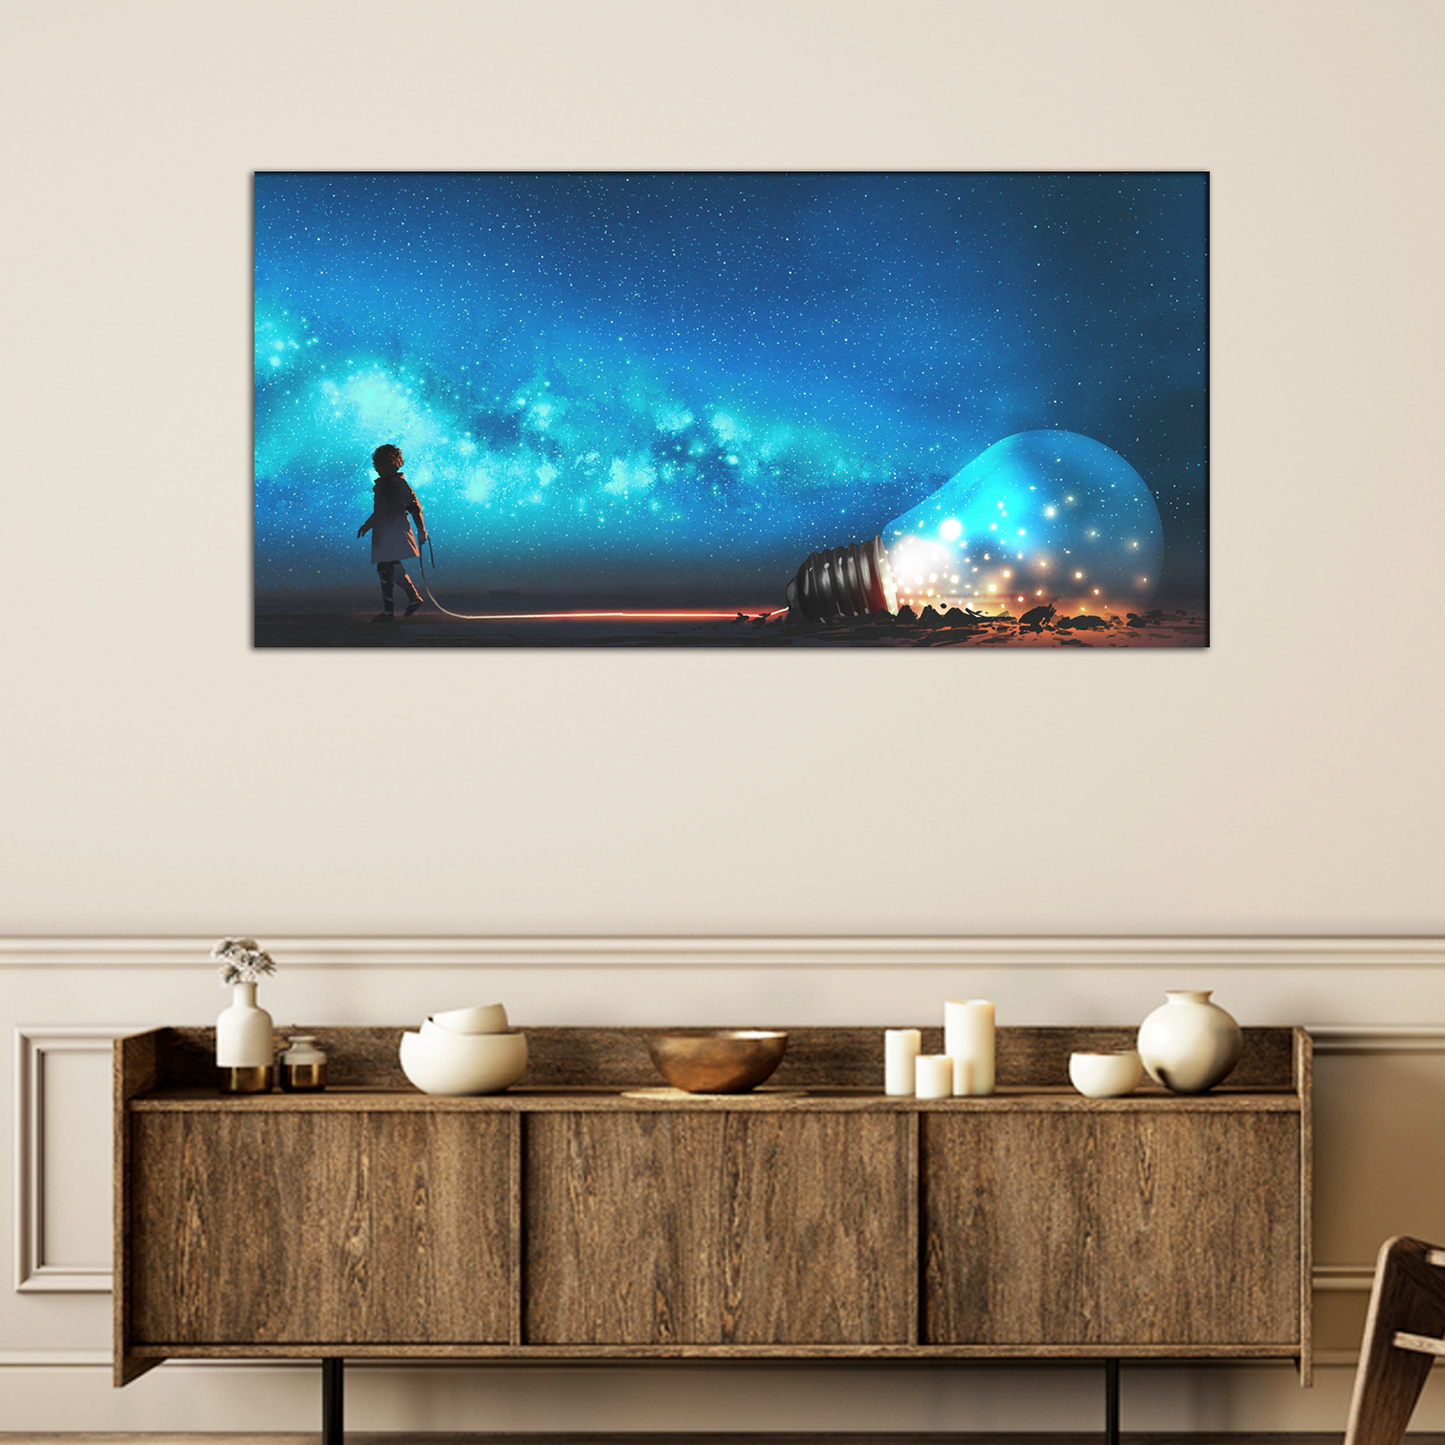 Boy Pulled The Big Bulb Abstract Canvas Print Wall Painting